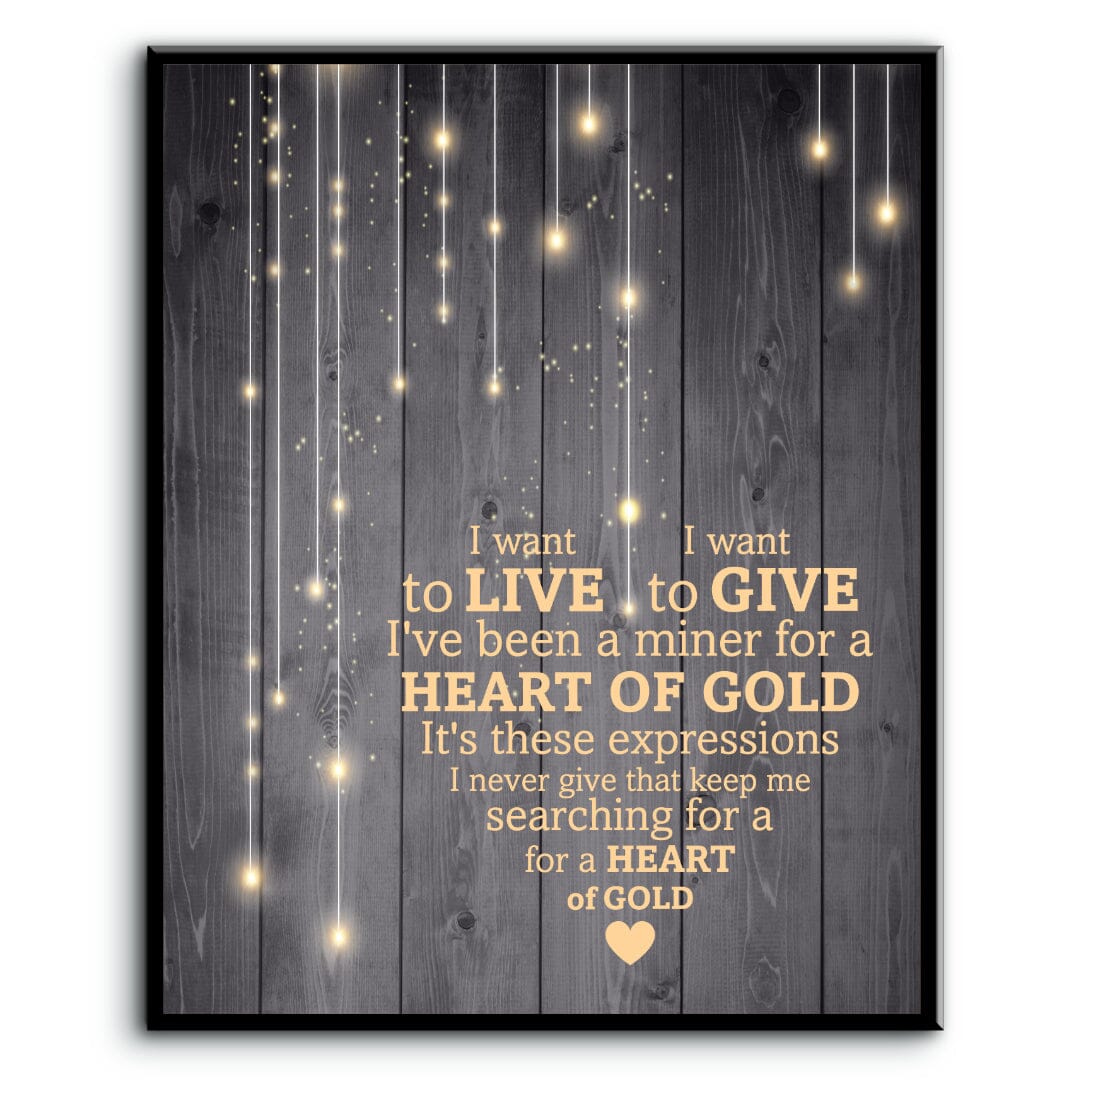 Heart of Gold by Neil Young - Lyric Song Art Wall Print Song Lyrics Art Song Lyrics Art 8x10 Plaque Mount 